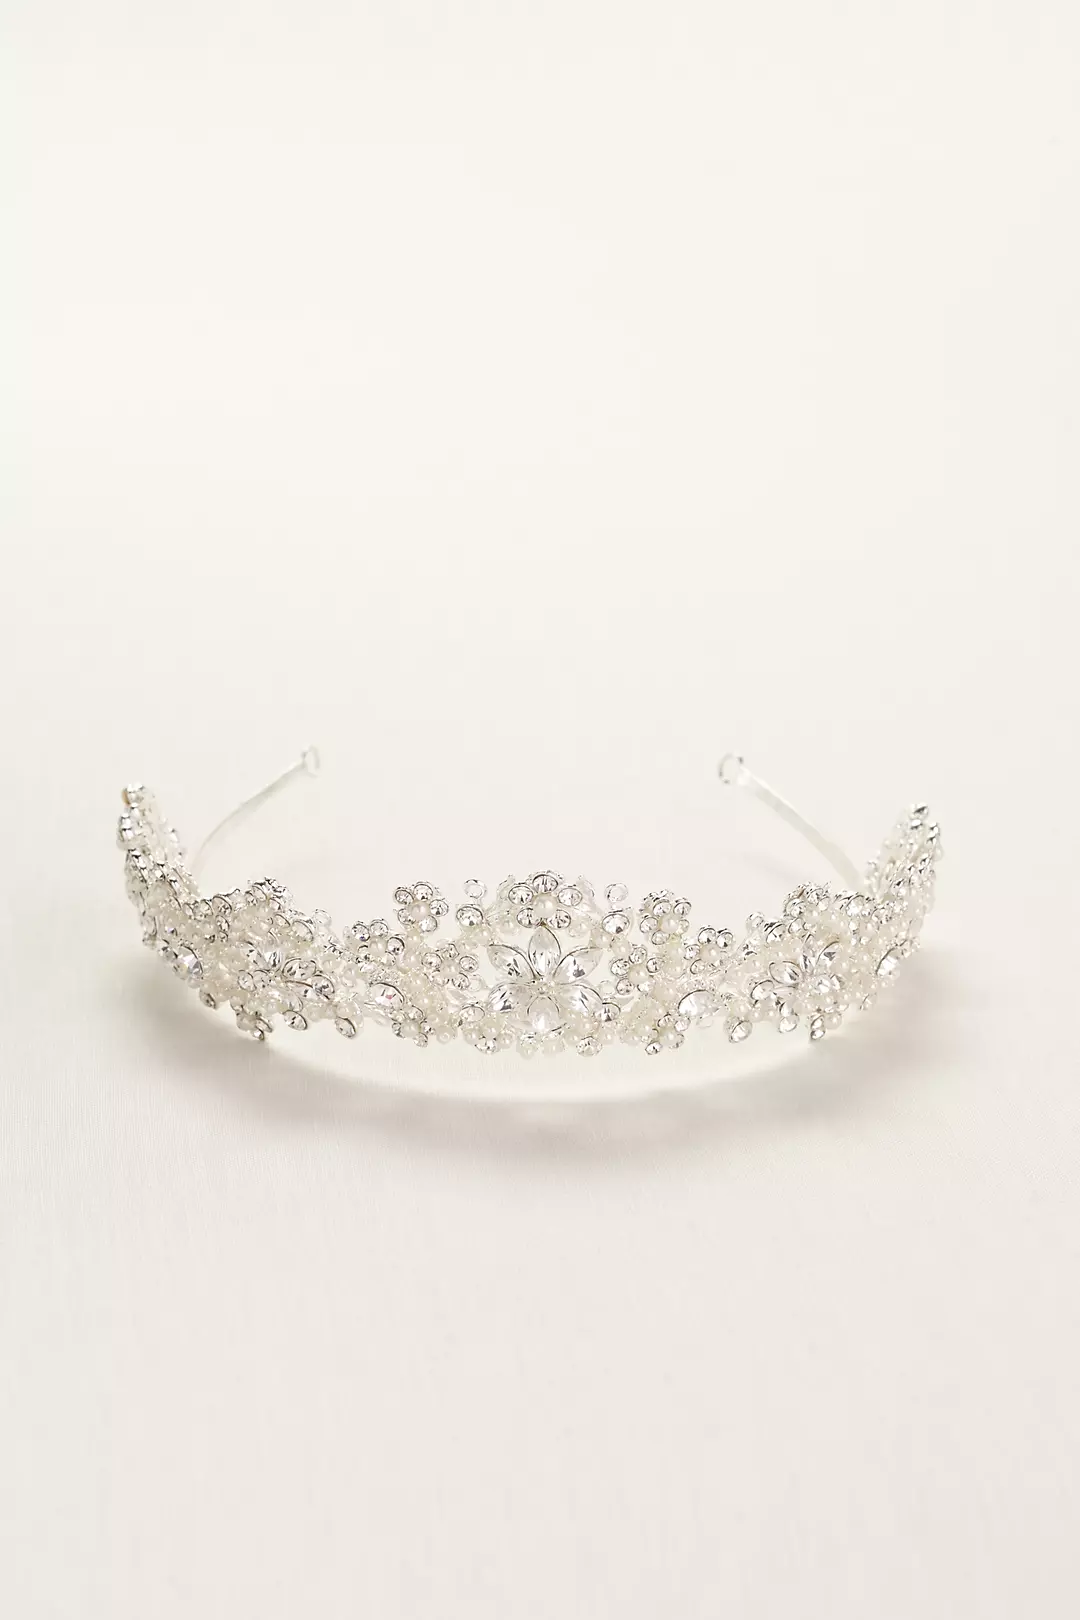 Light Colored Tiara with Pearls and Crystals Image 3